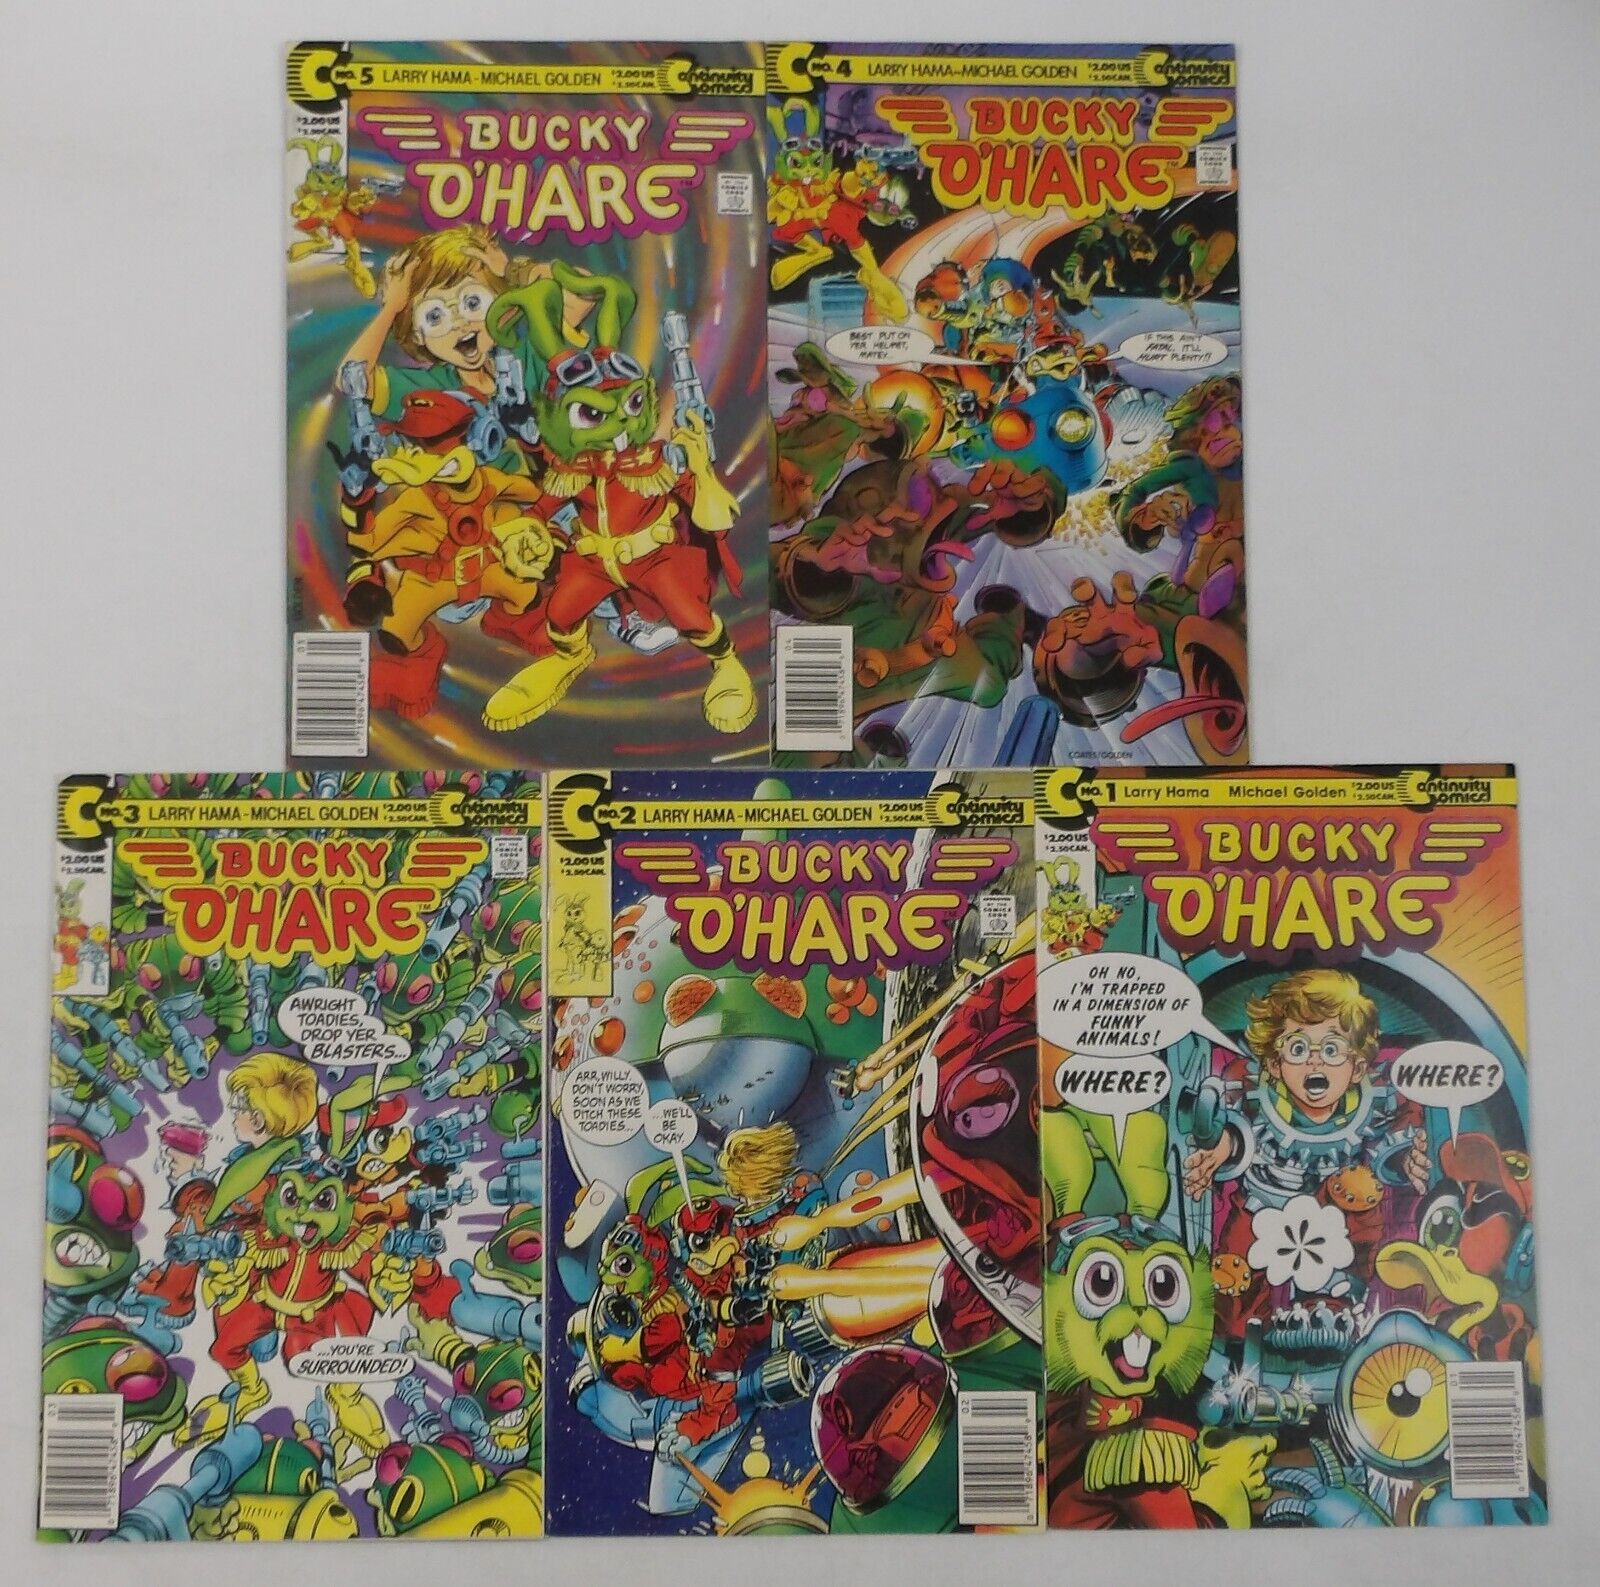 Bucky O'Hare #1-5 VF/NM complete series Larry Hama - all newsstand variants